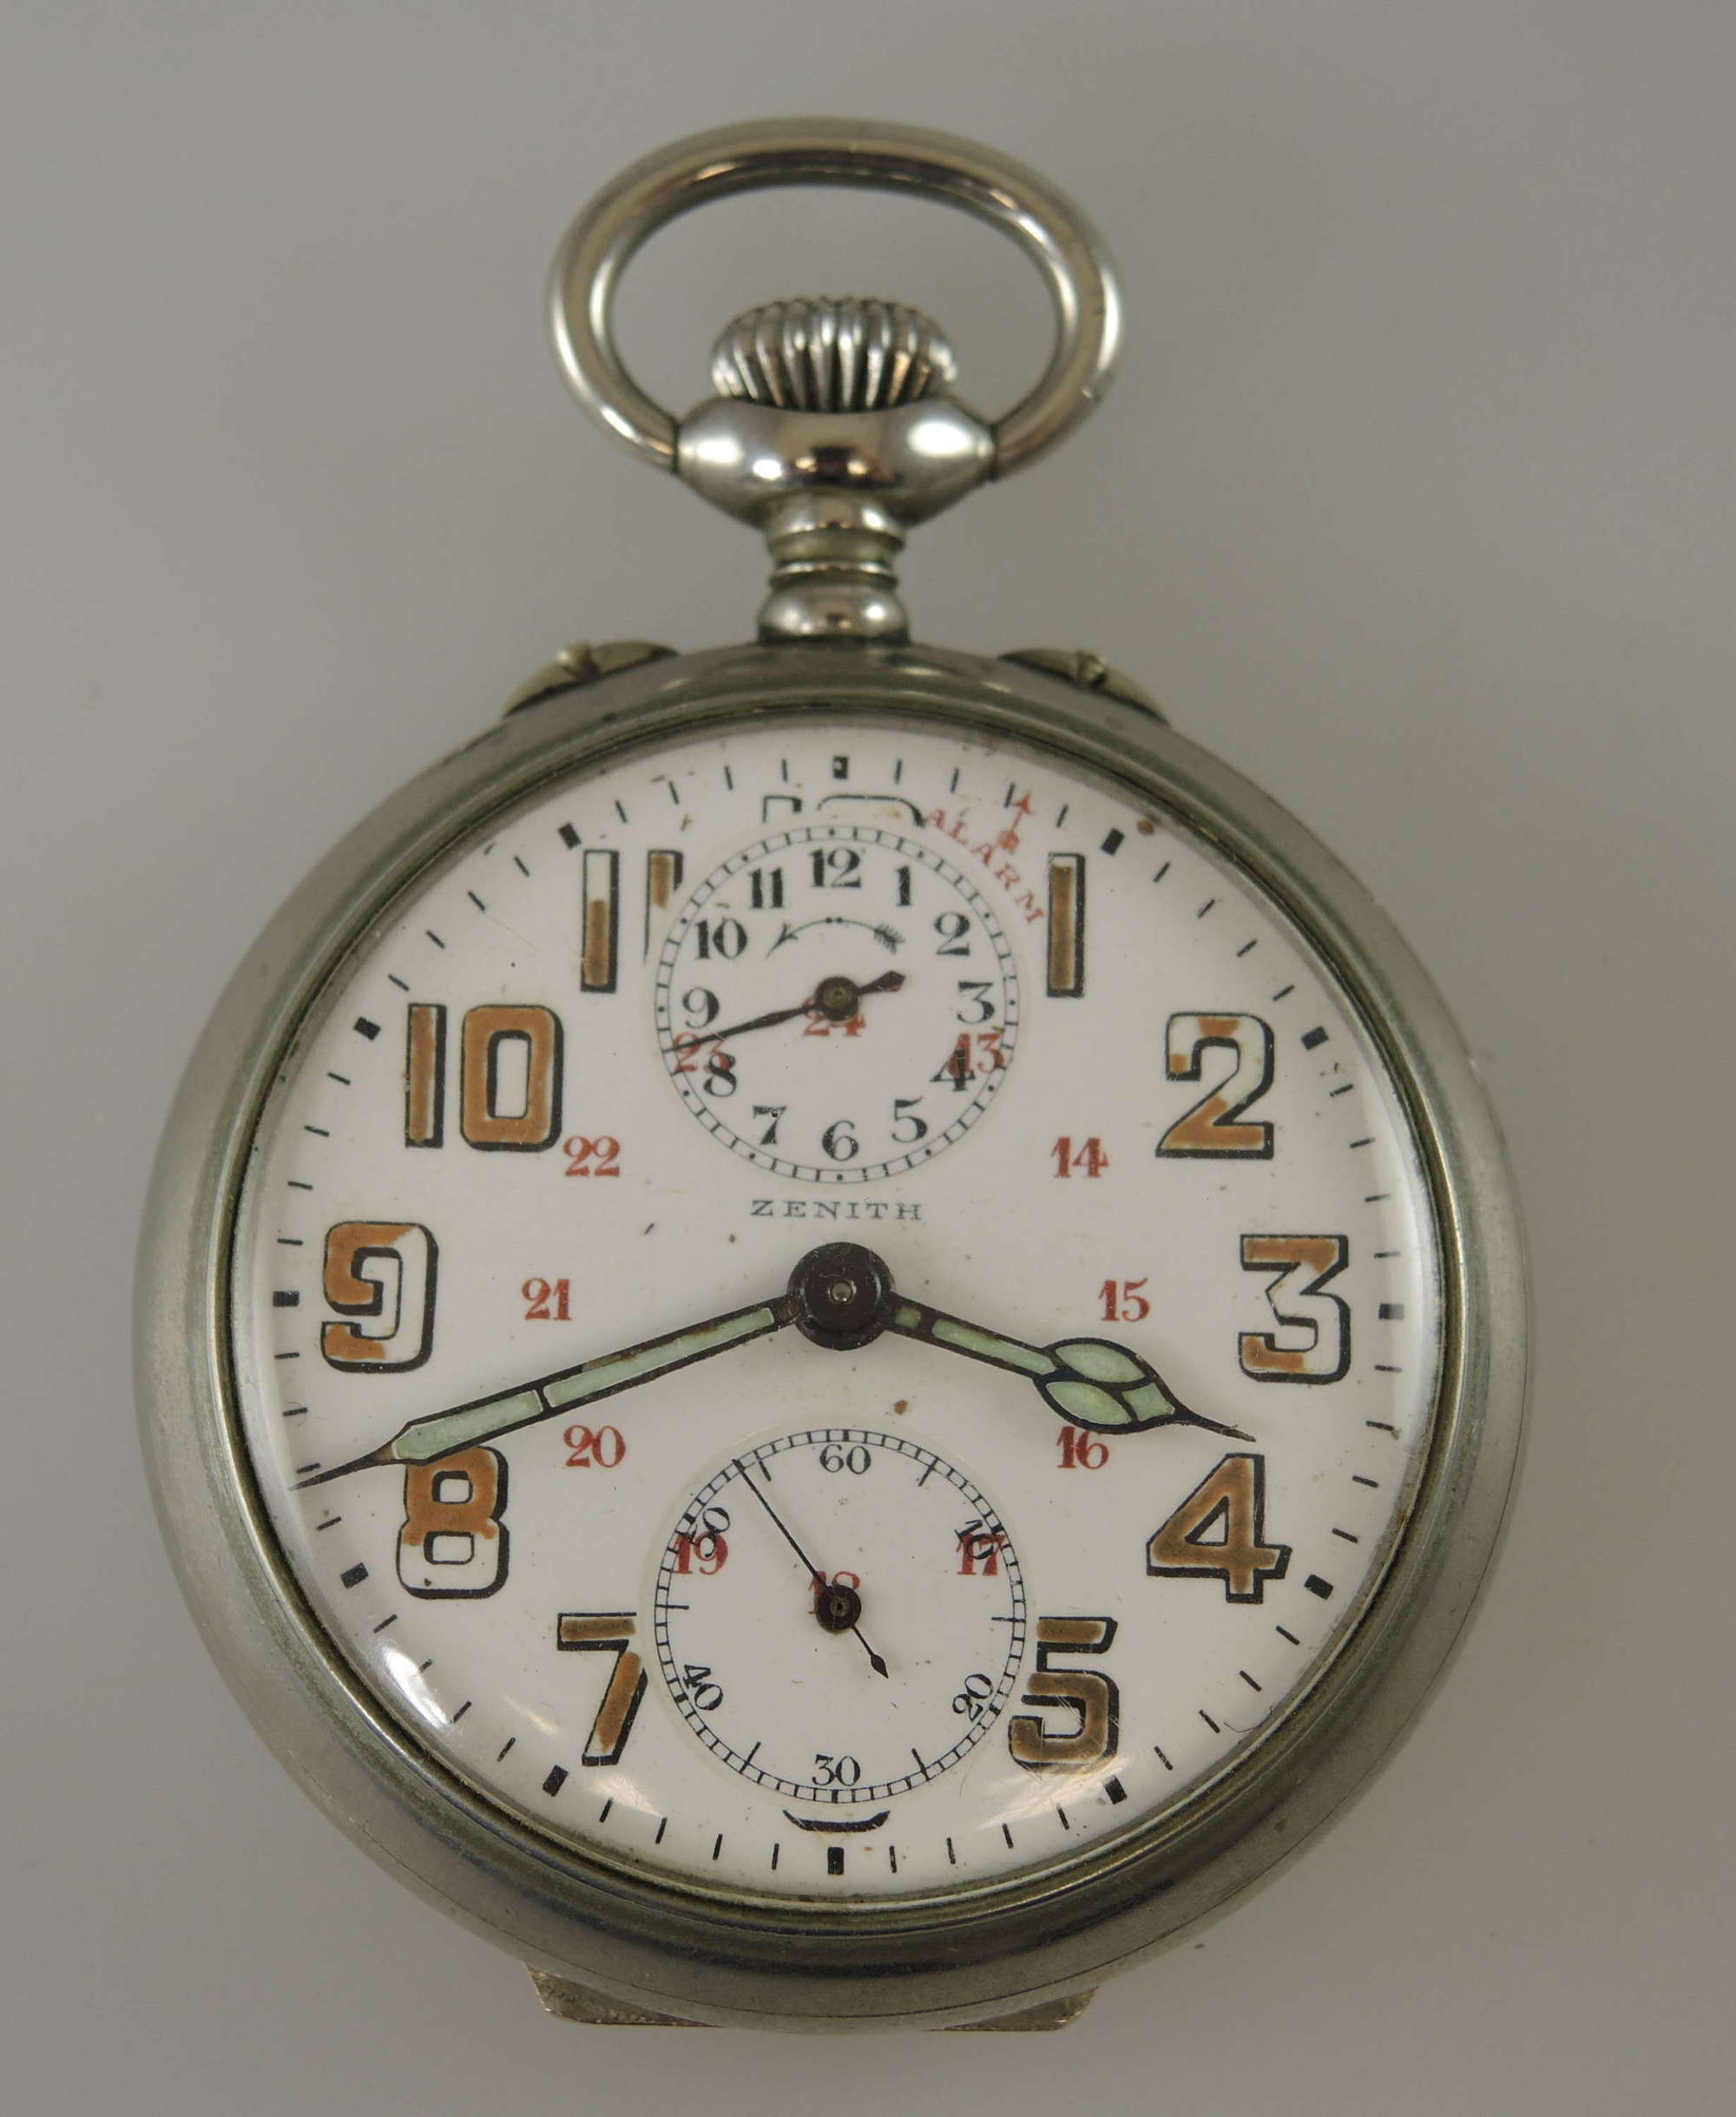 Zenith pocket watch with an alarm function c1910